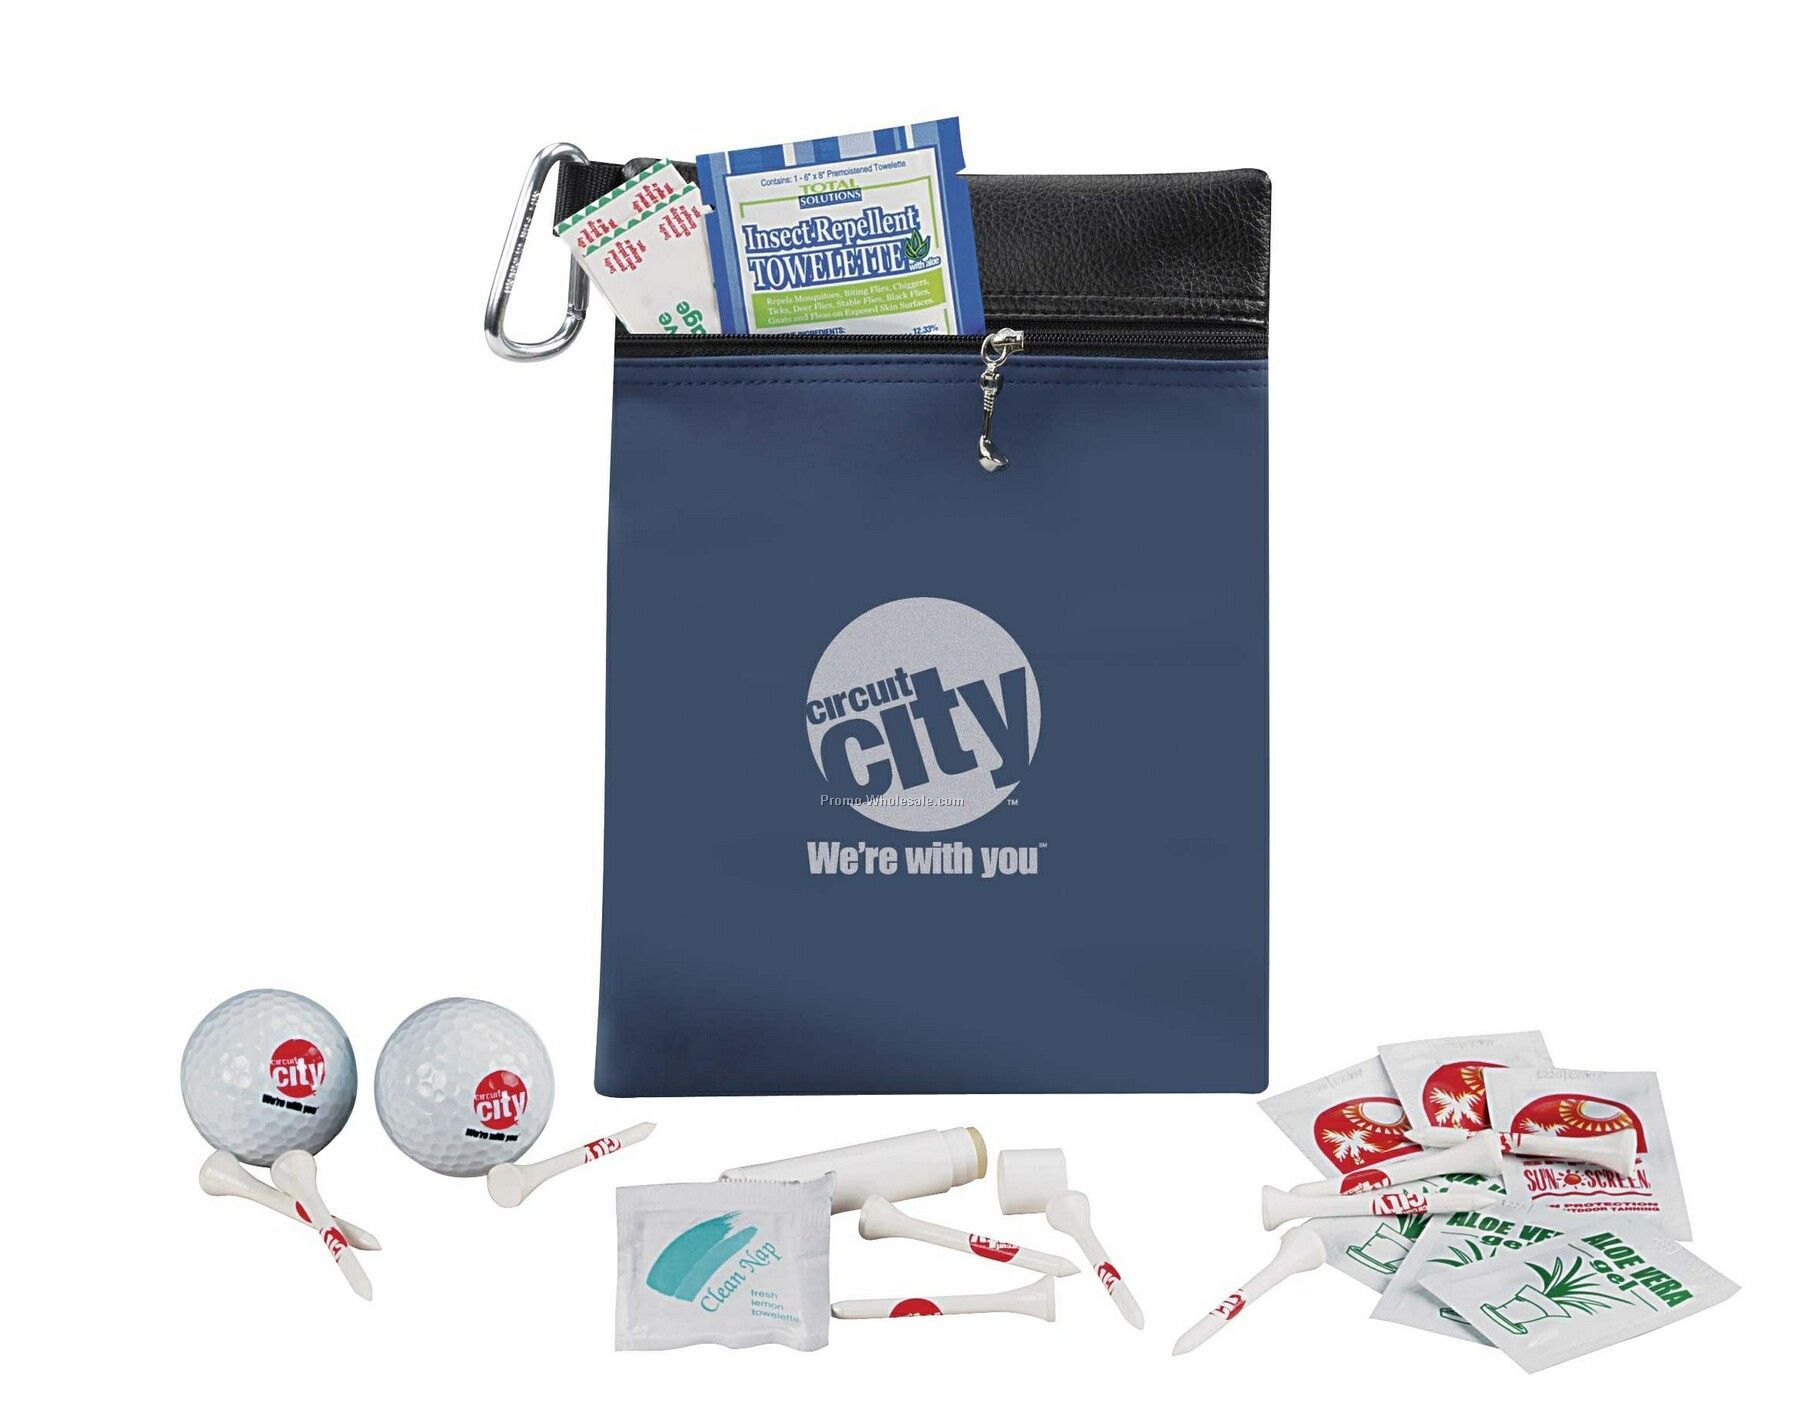 Tee Off Golfer's Survival Kit W/2 Noodle Soft Golf Ball & First Aid Kit